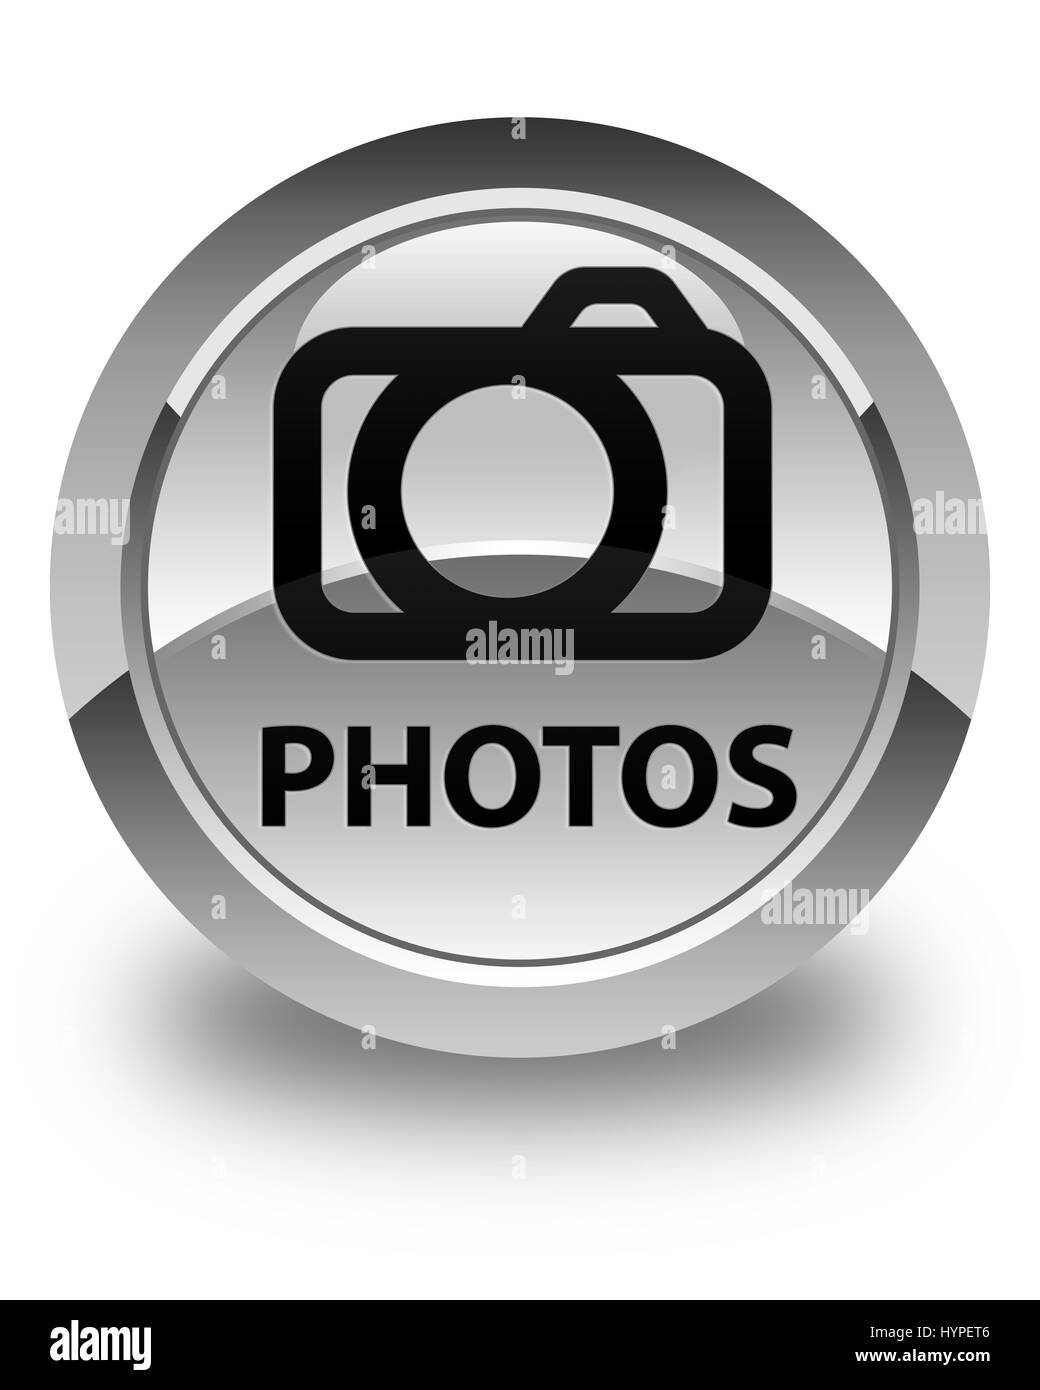 Photos (camera icon) isolated on glossy white round button abstract illustration Stock Photo